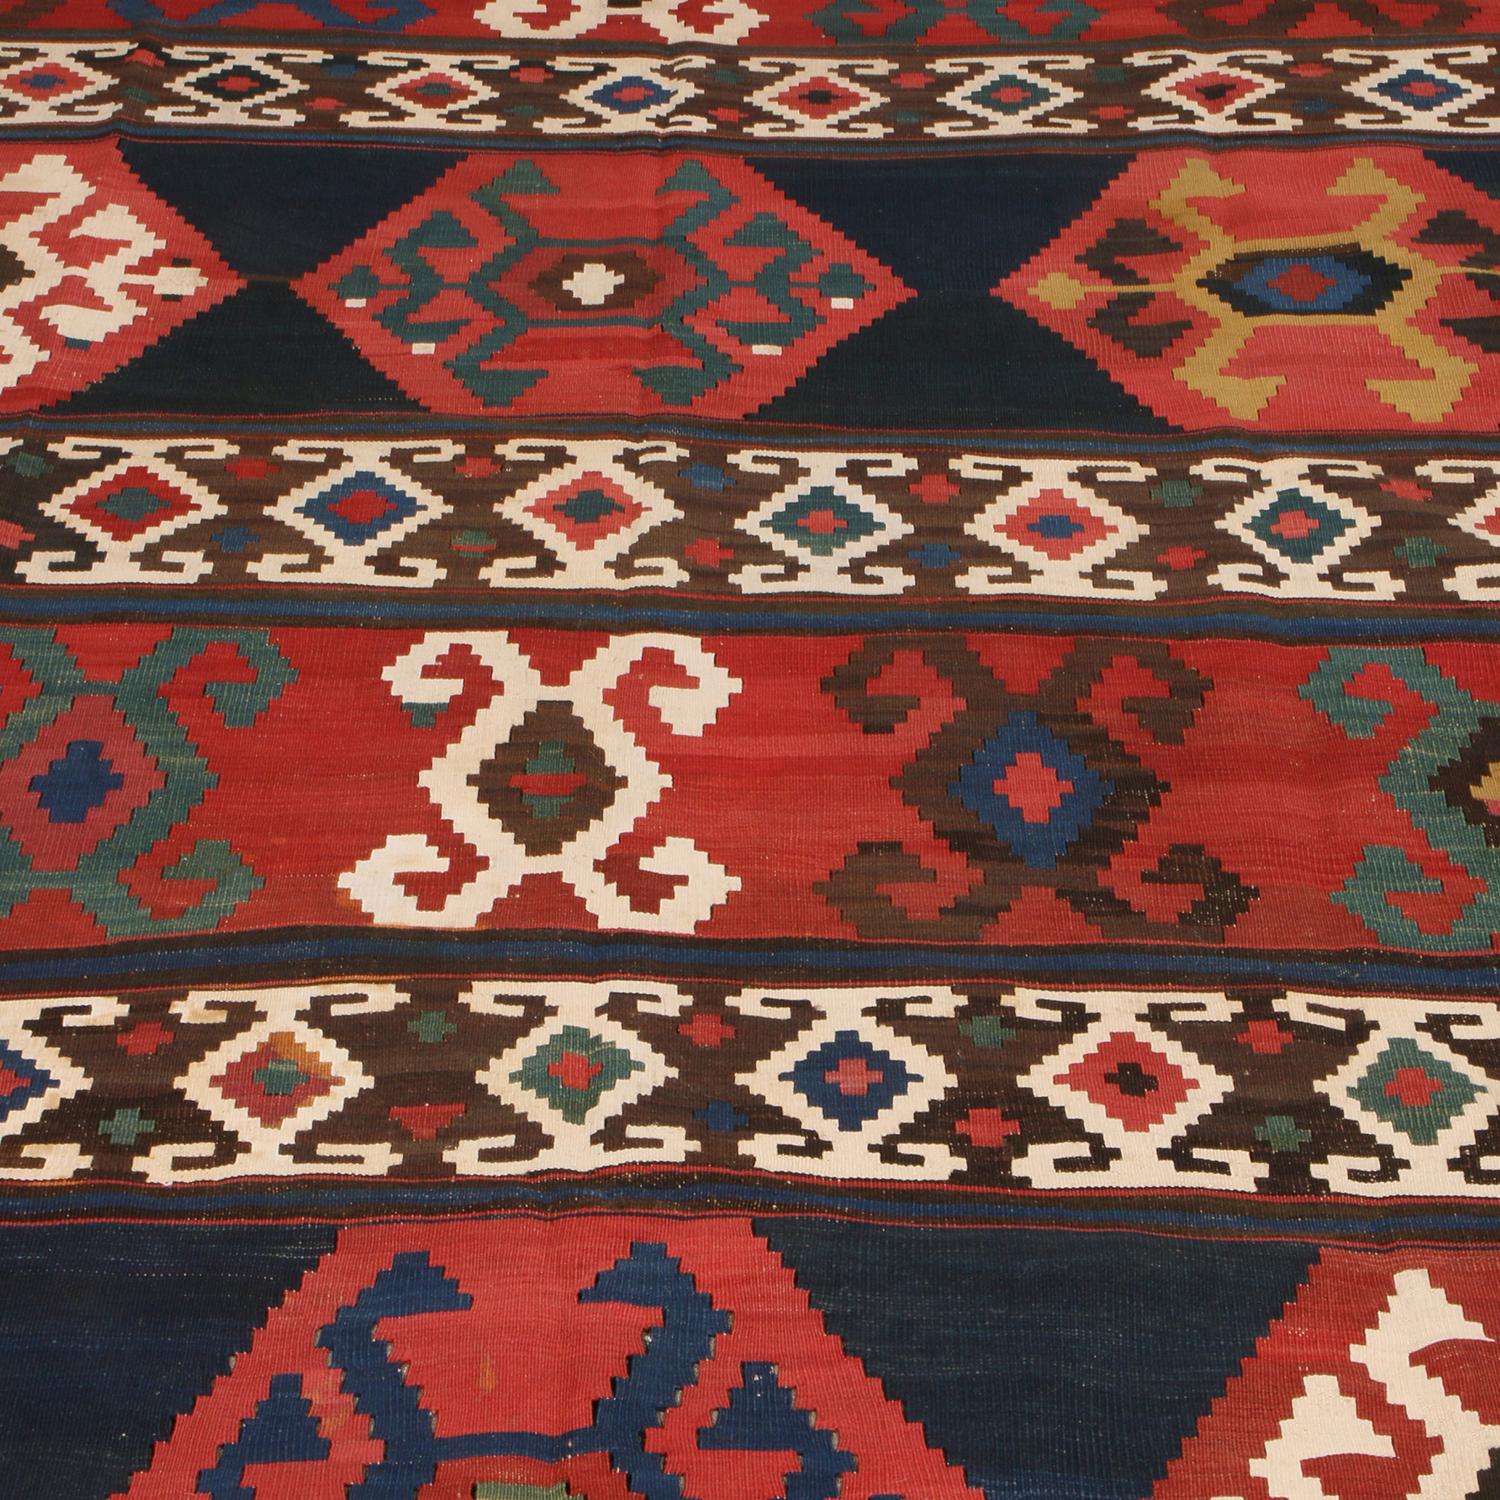 Hand-Woven Antique Geometric Navy Blue and Burgundy Wool Kilim with White and Green Accents